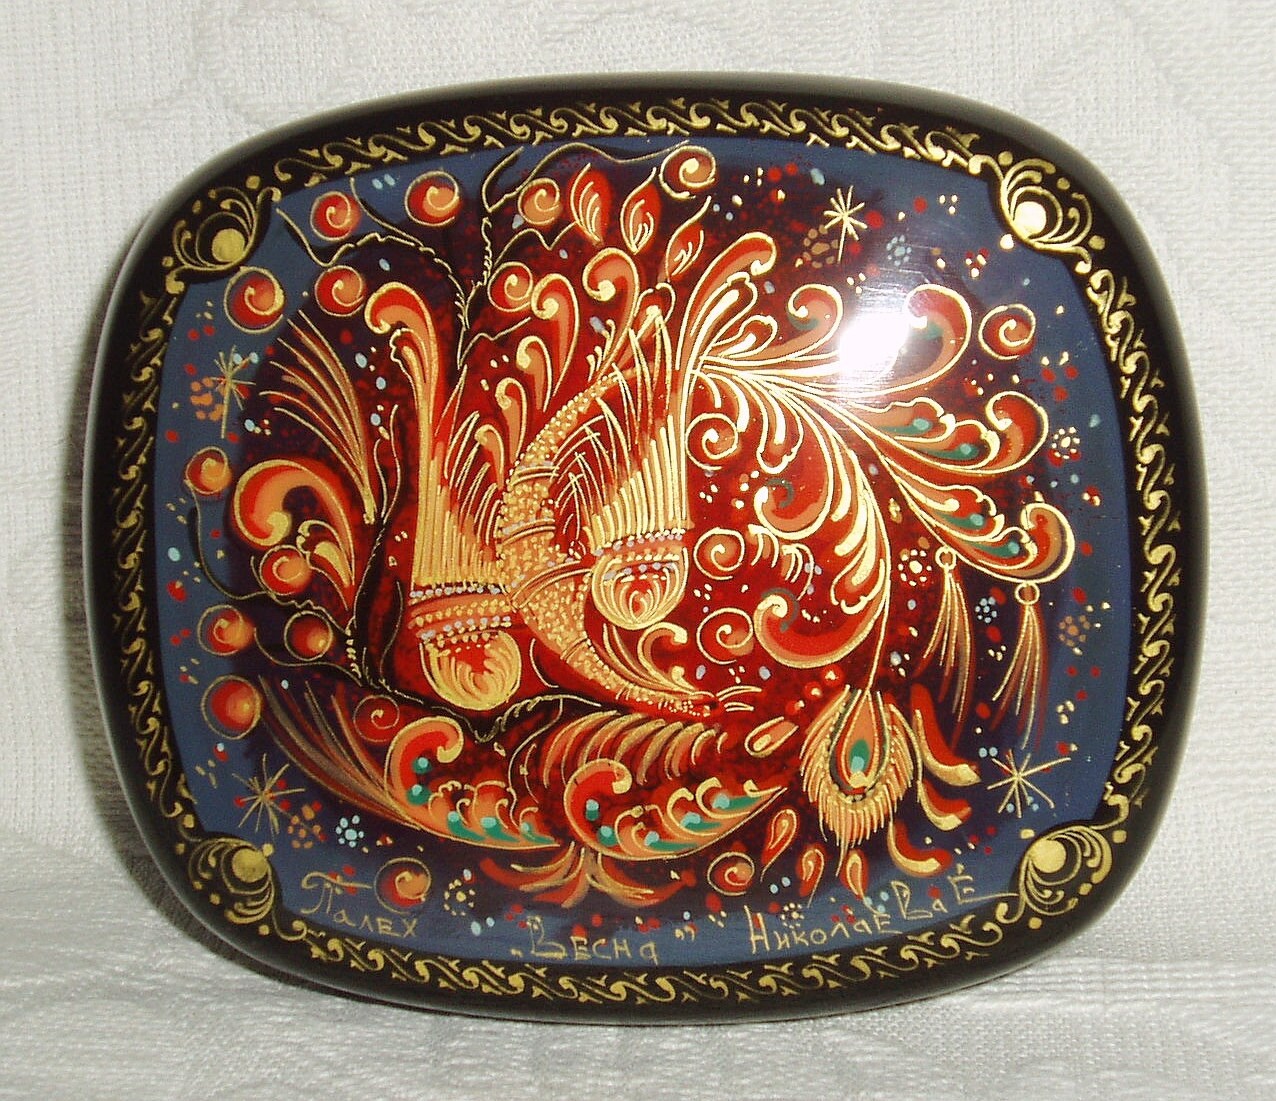 Beautiful Hand Painted Russian Lacquer box by tanyaHPSrus on Etsy